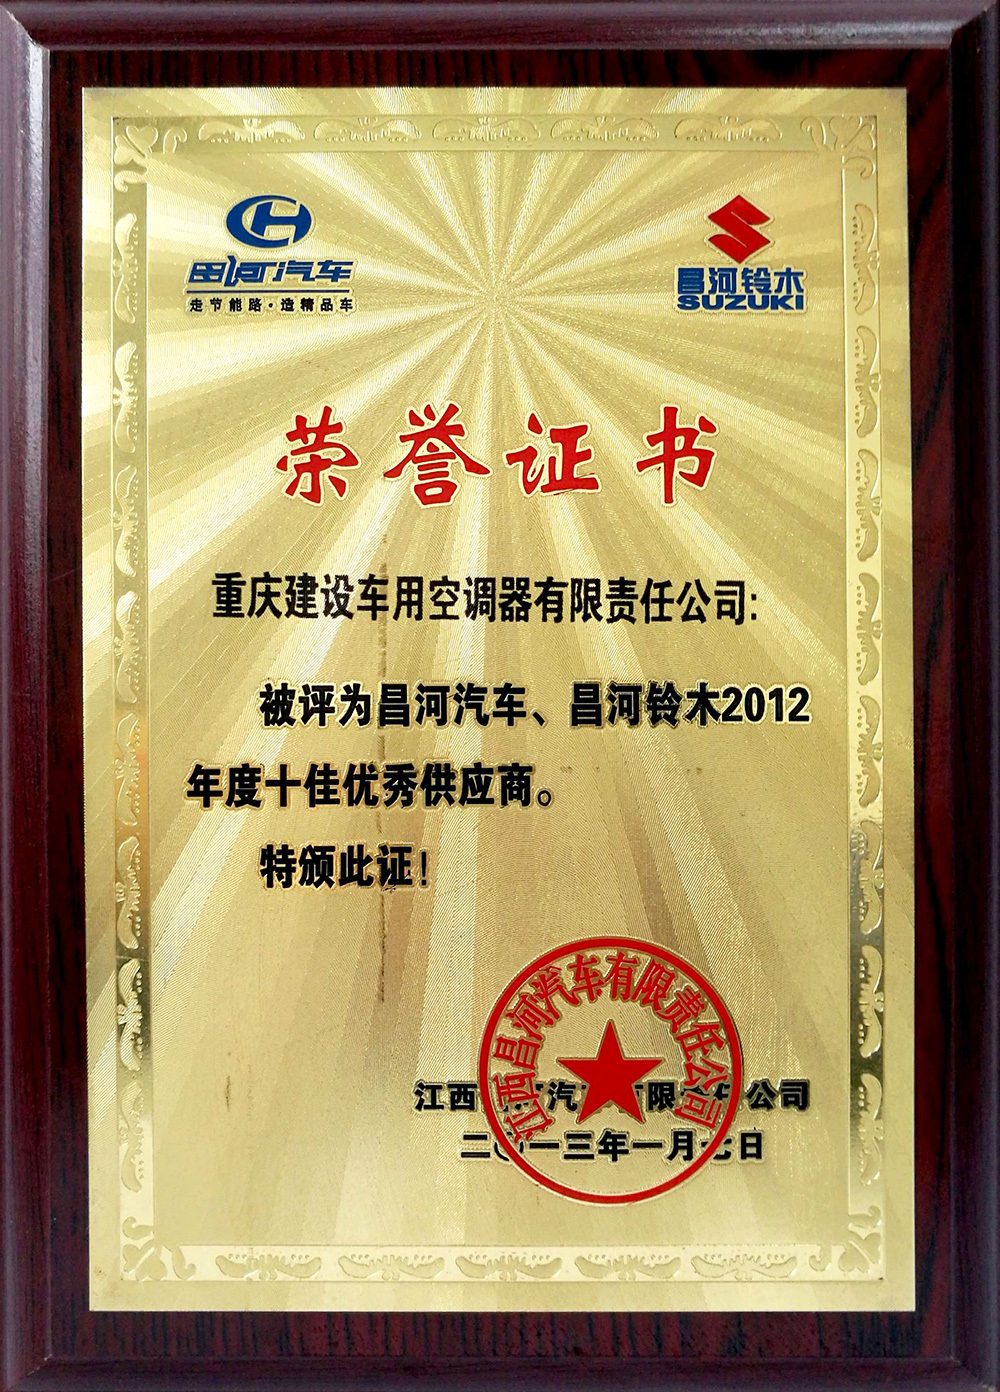 2012 Top 10 Outstanding Suppliers of Changhe Automobile and Changhe Suzuki Automobile